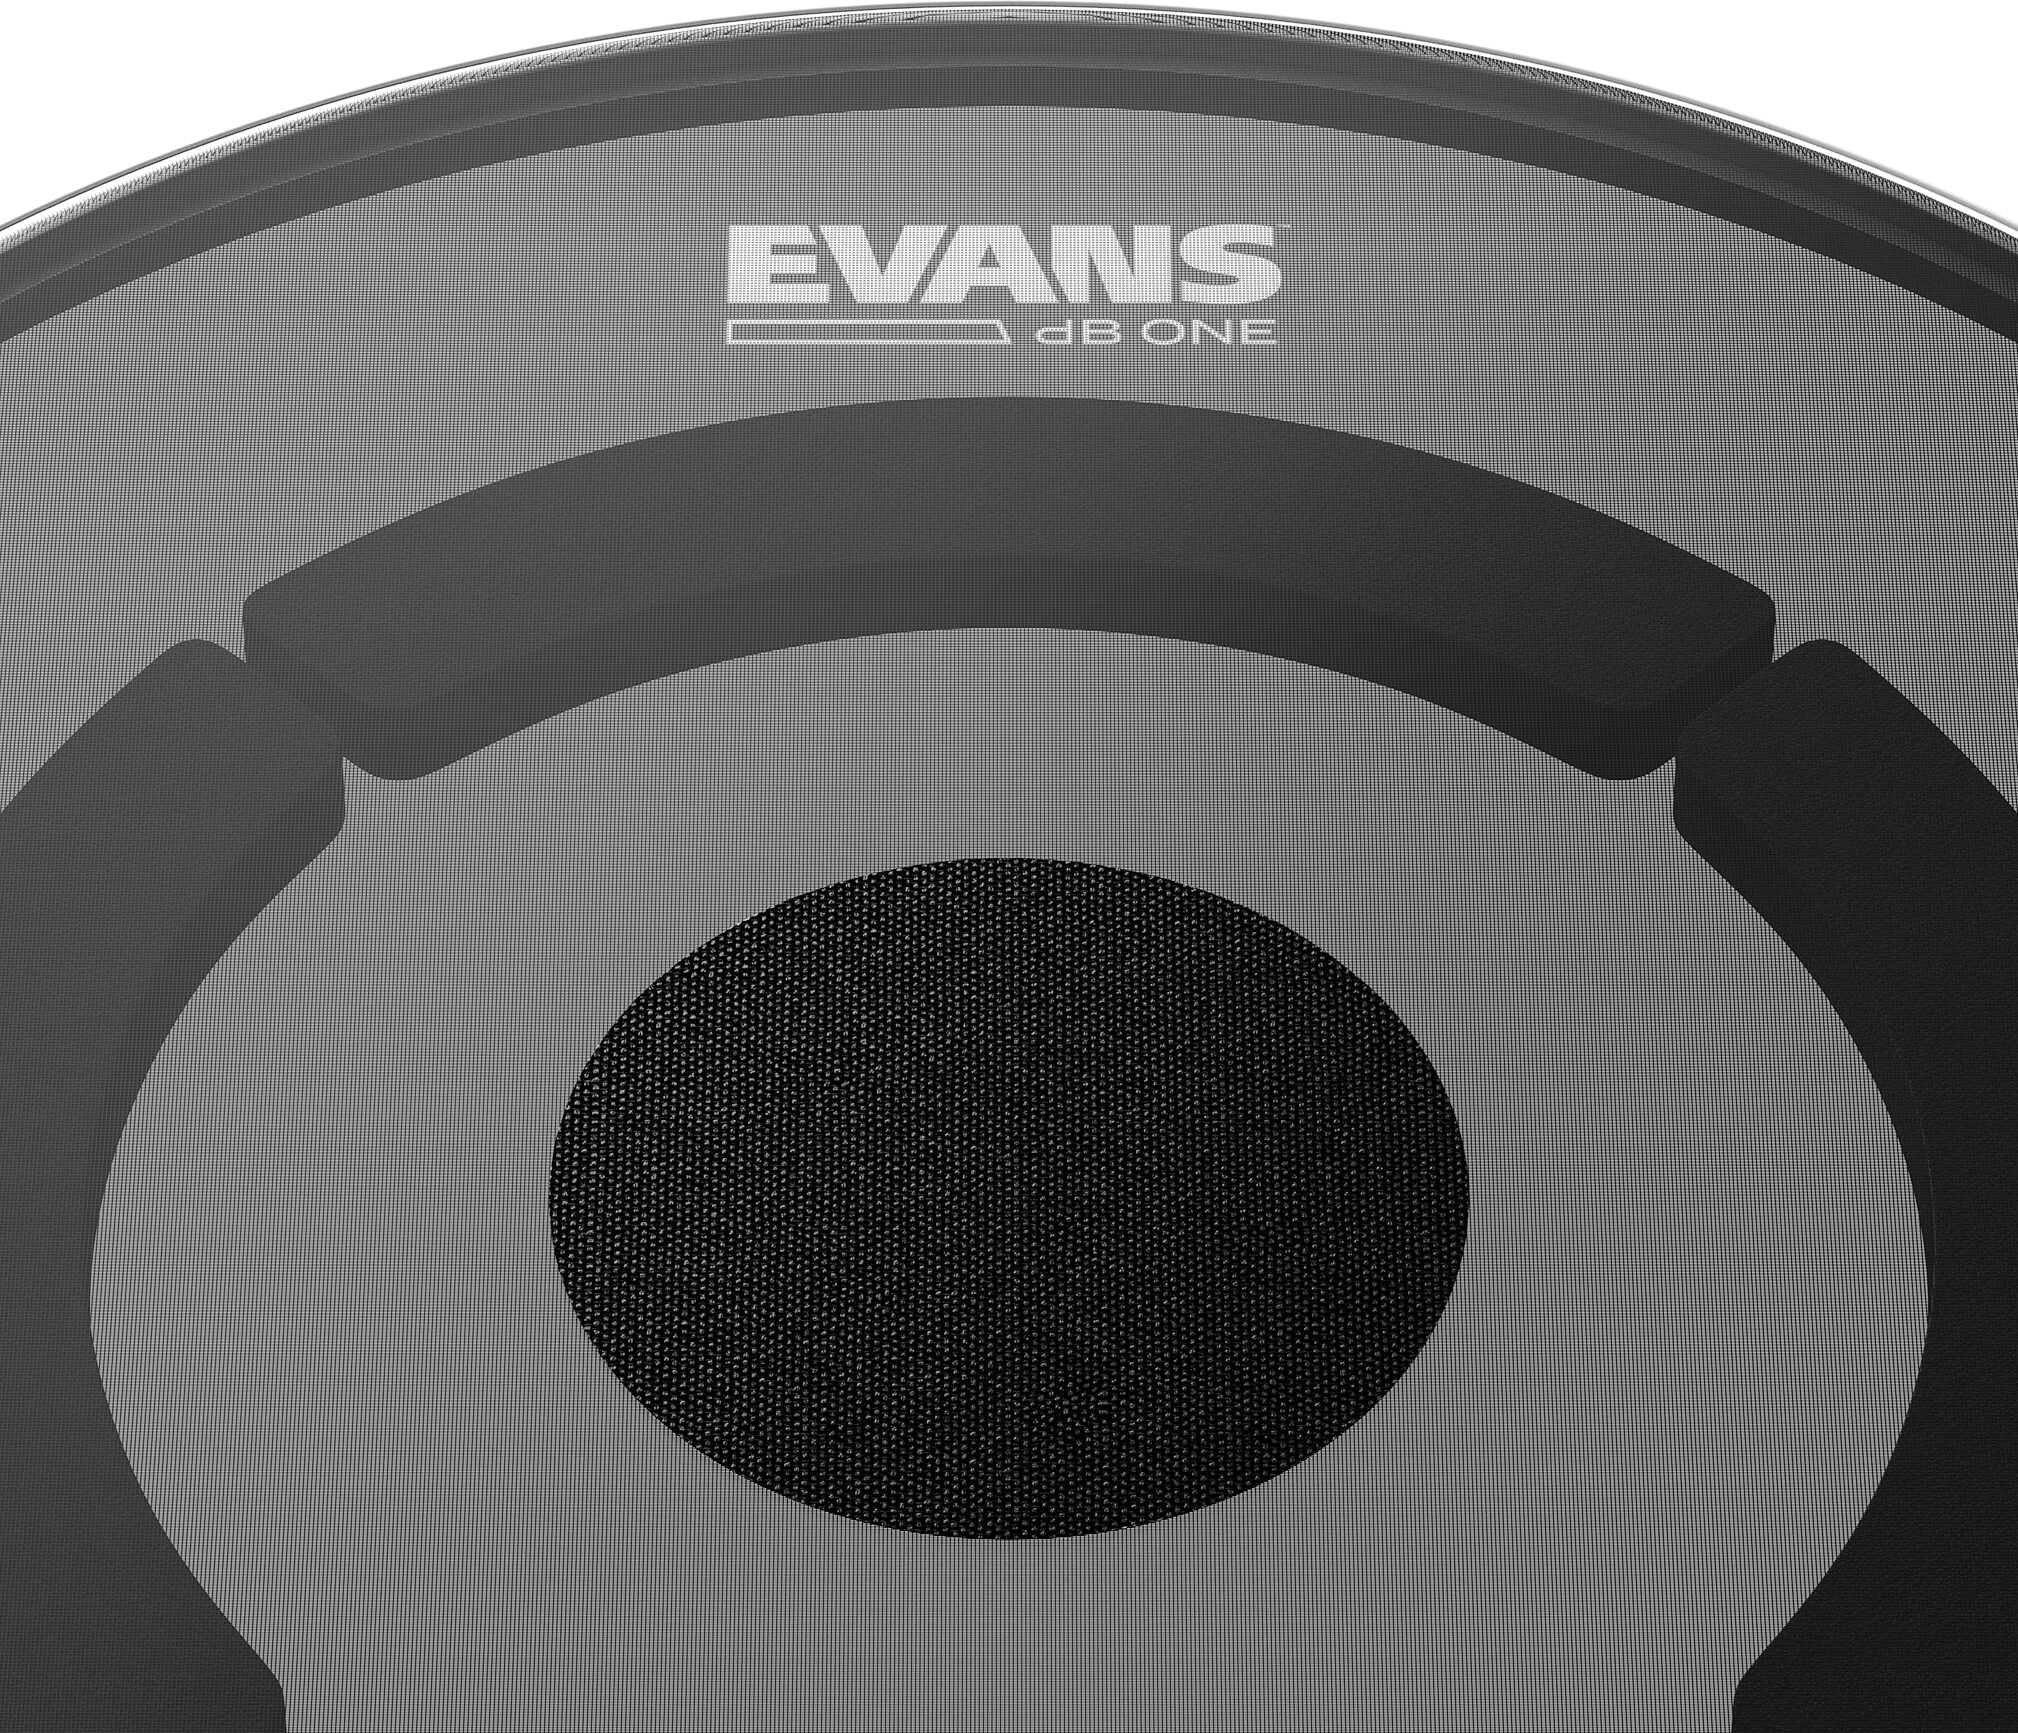 Evans dB One ShockWeave Mesh Drumhead | zZounds